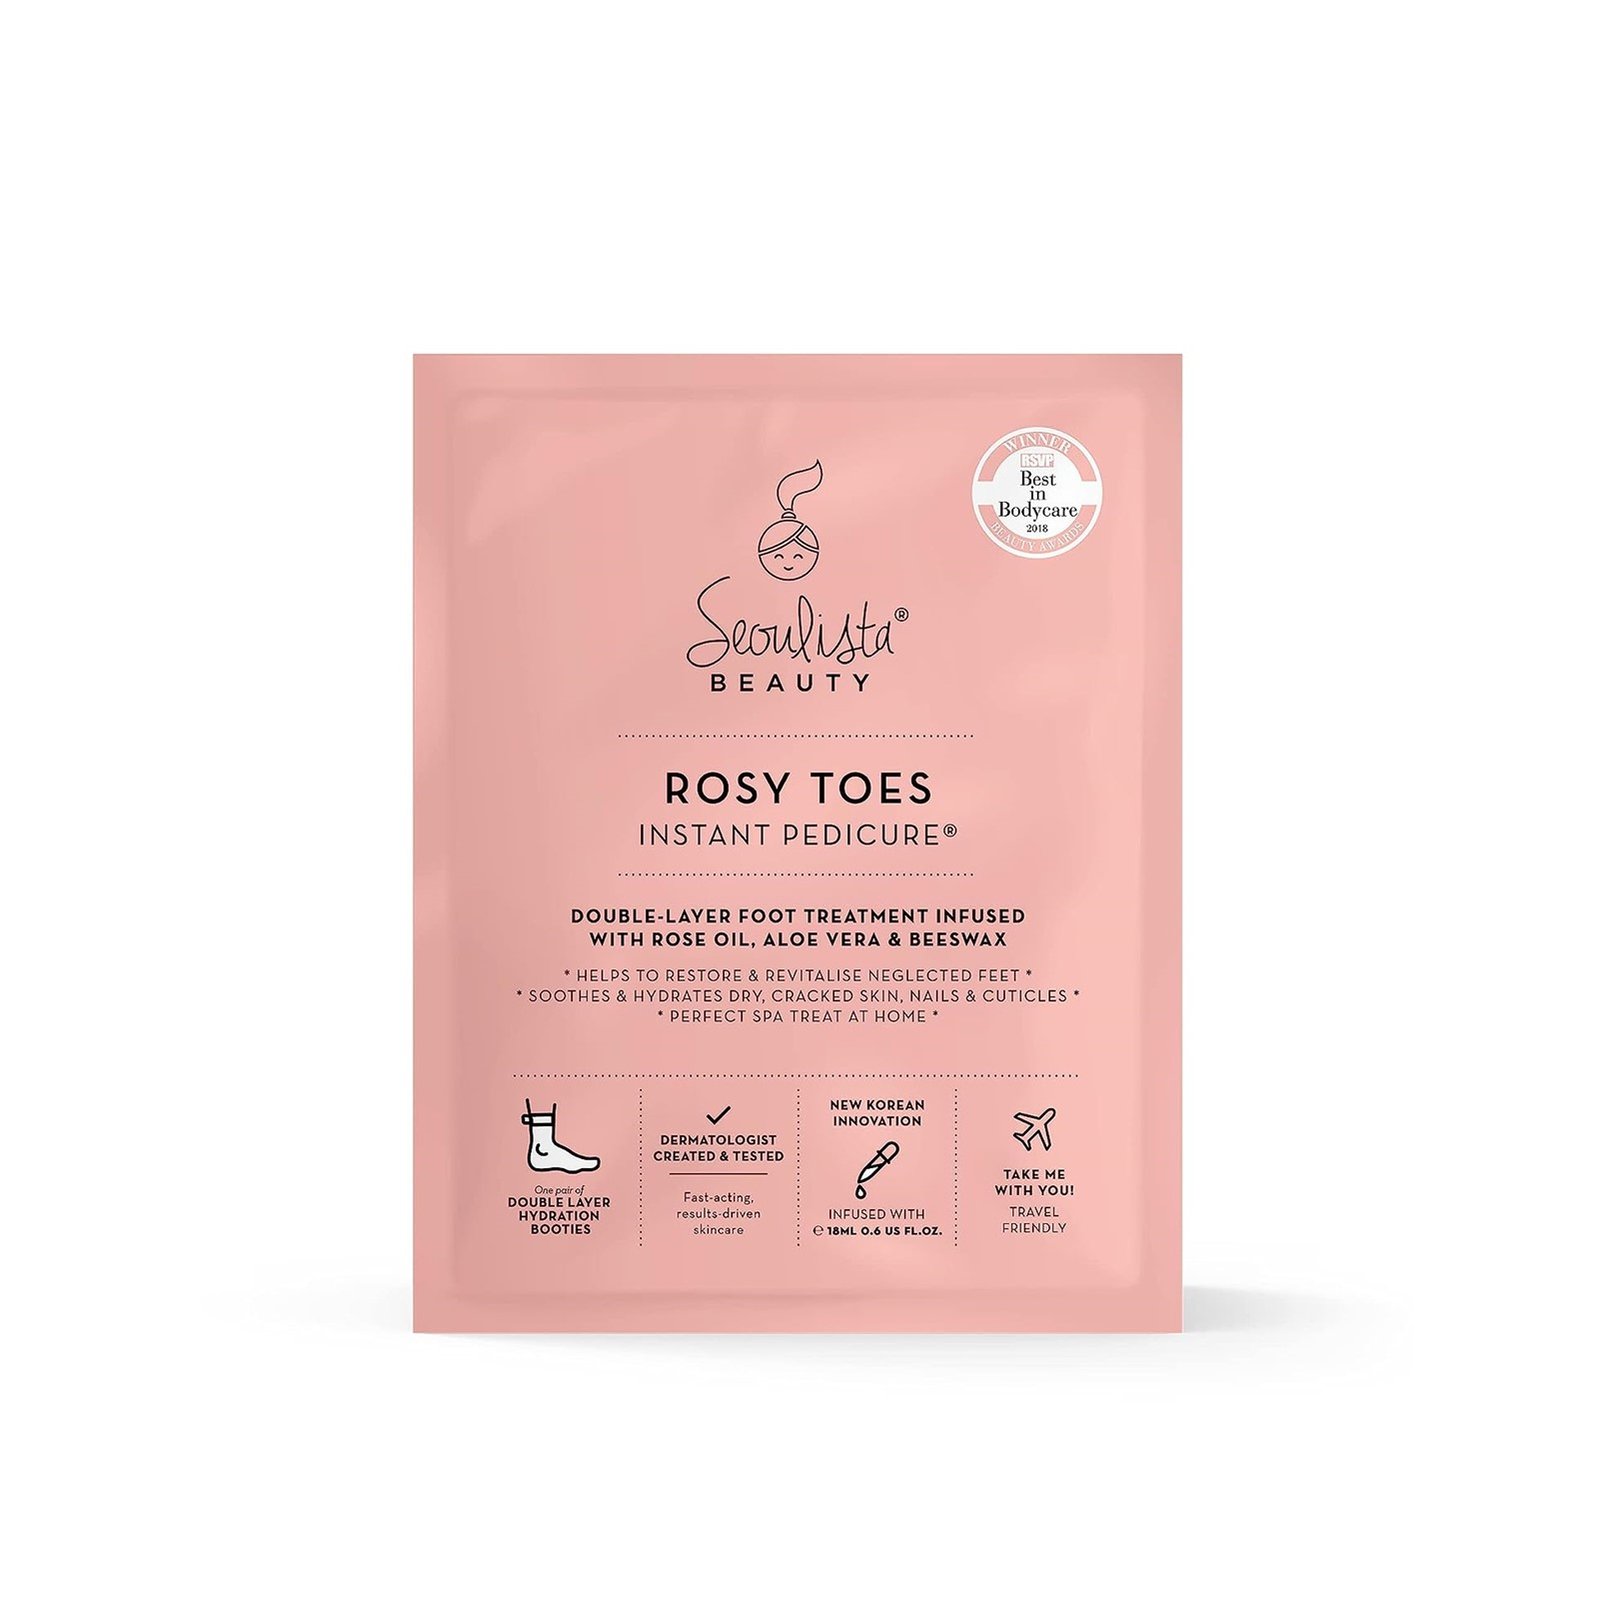 Seoulista Beauty Rosy Toes Instant Pedicure Foot Mask 18ml (0.6 fl oz)